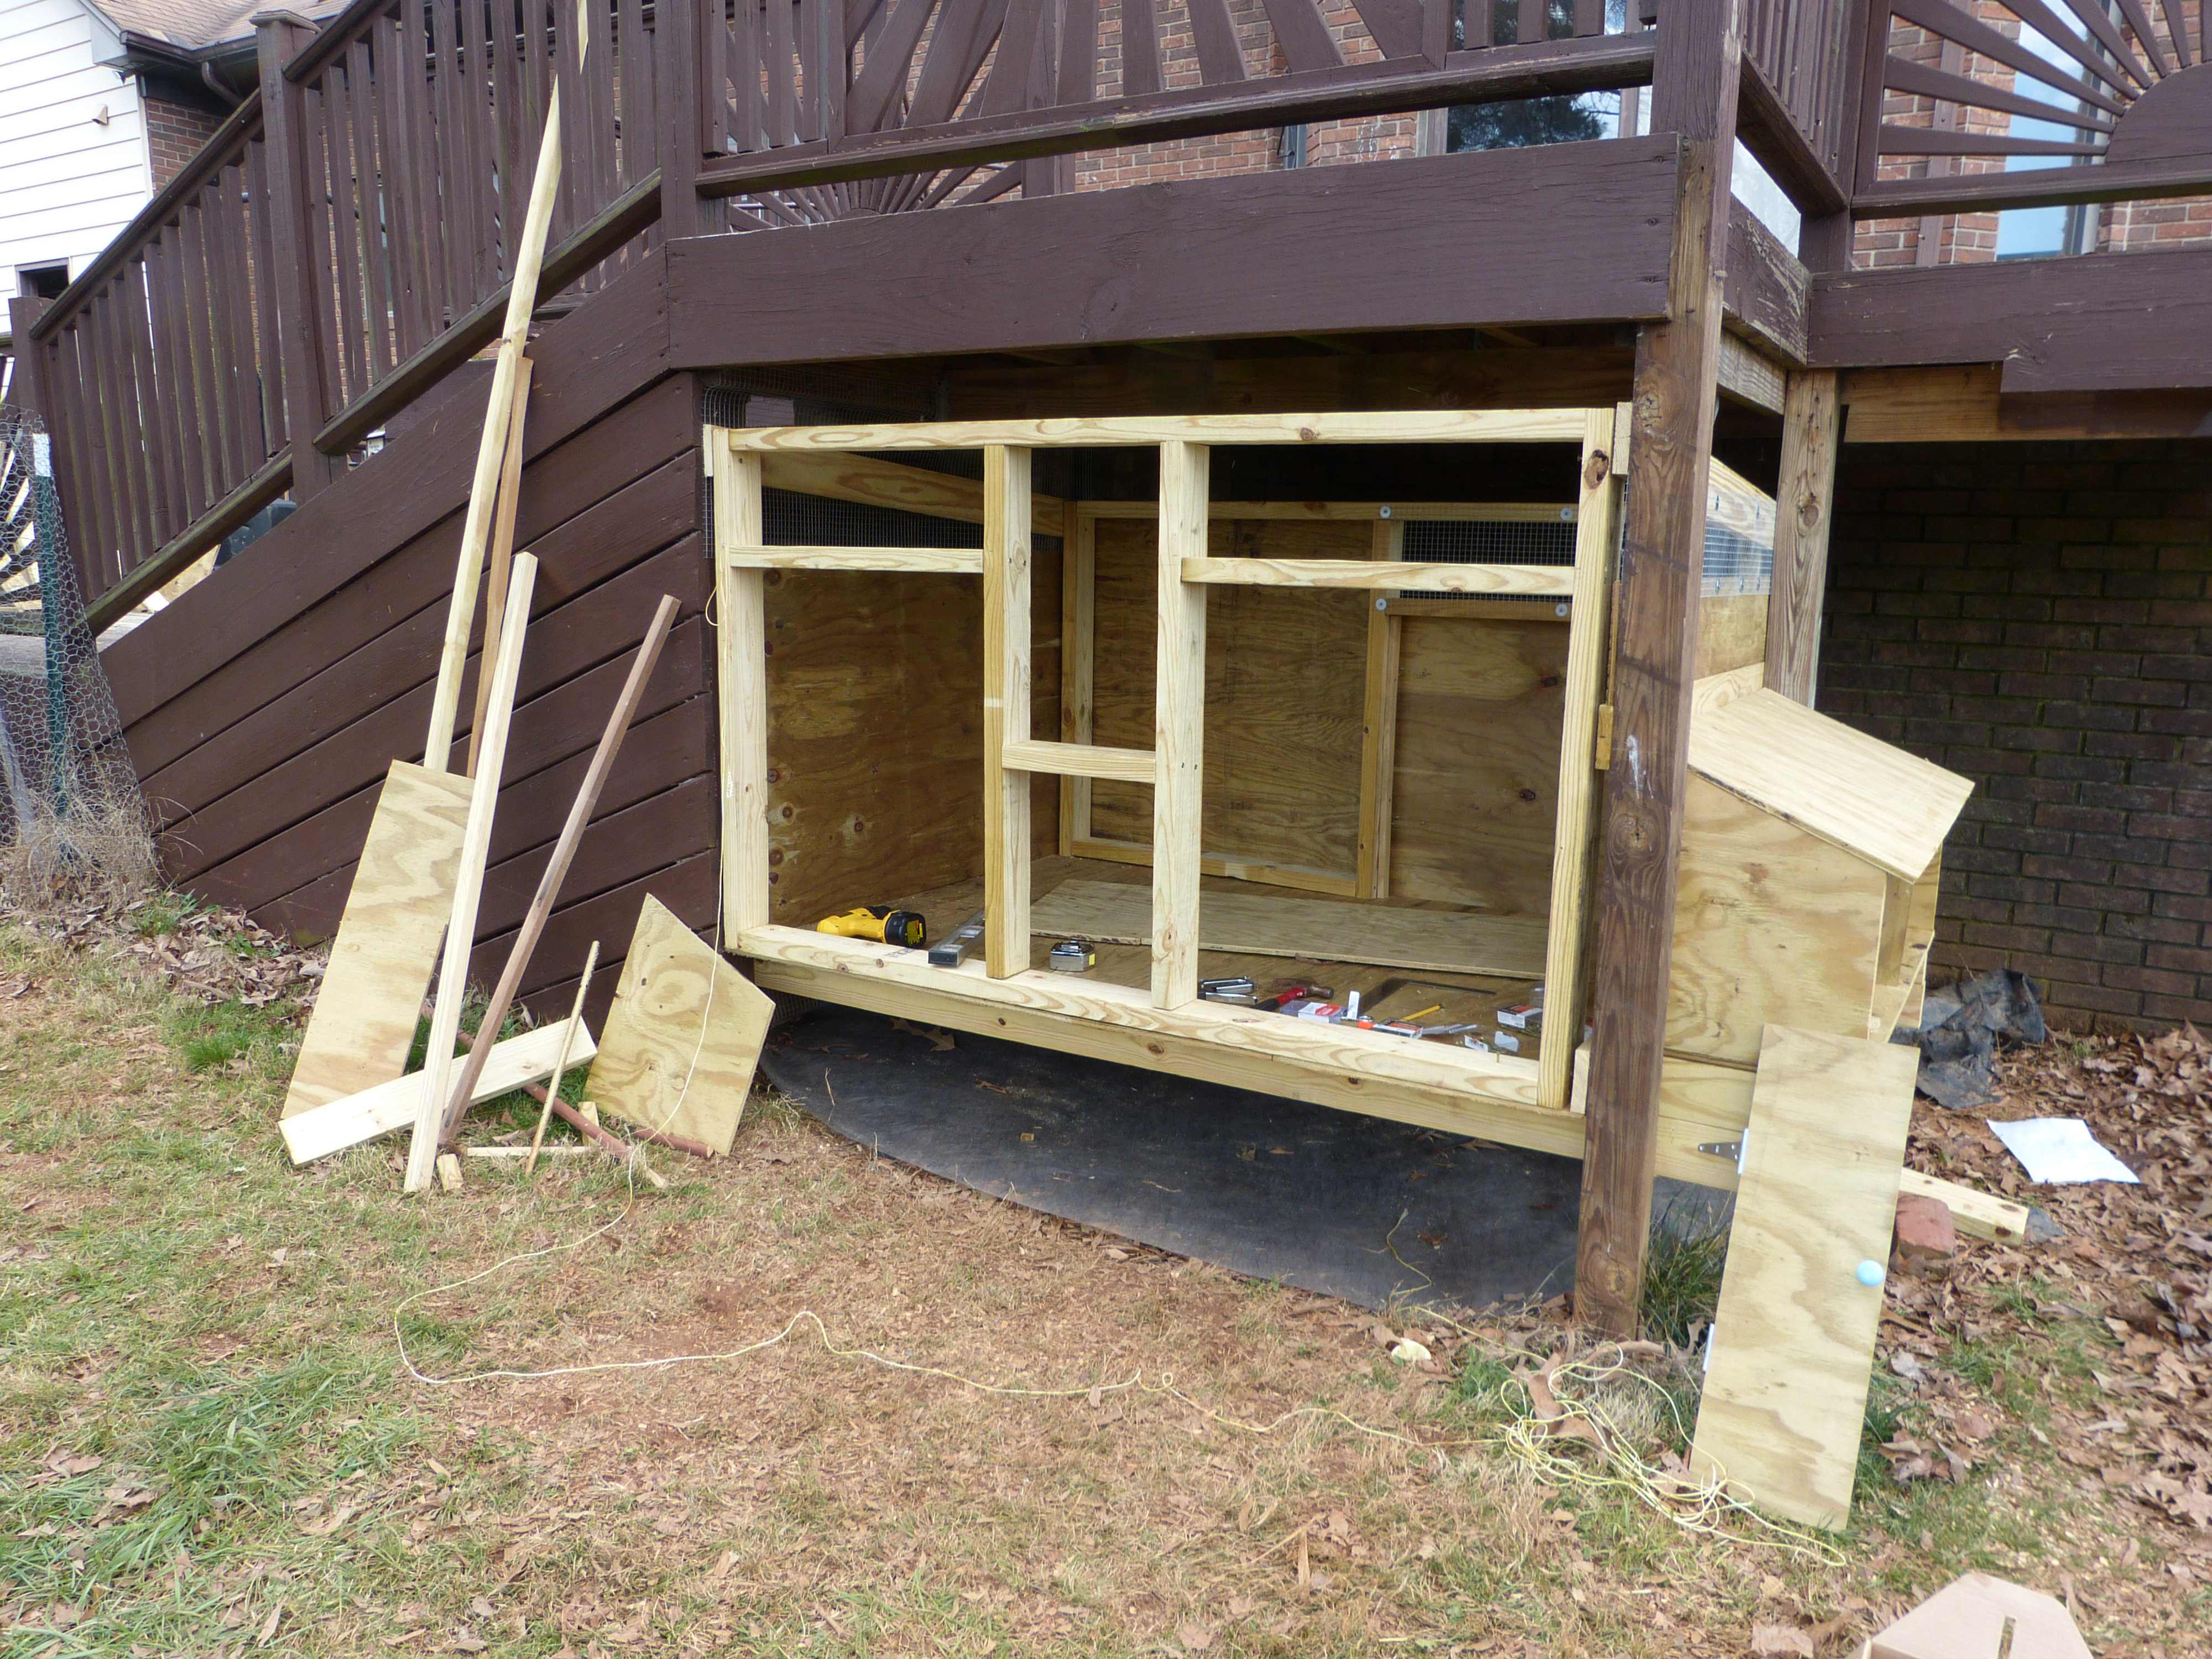 framing the face with another clean out door, a pop door, a window and a closed side nearest the nest boxes